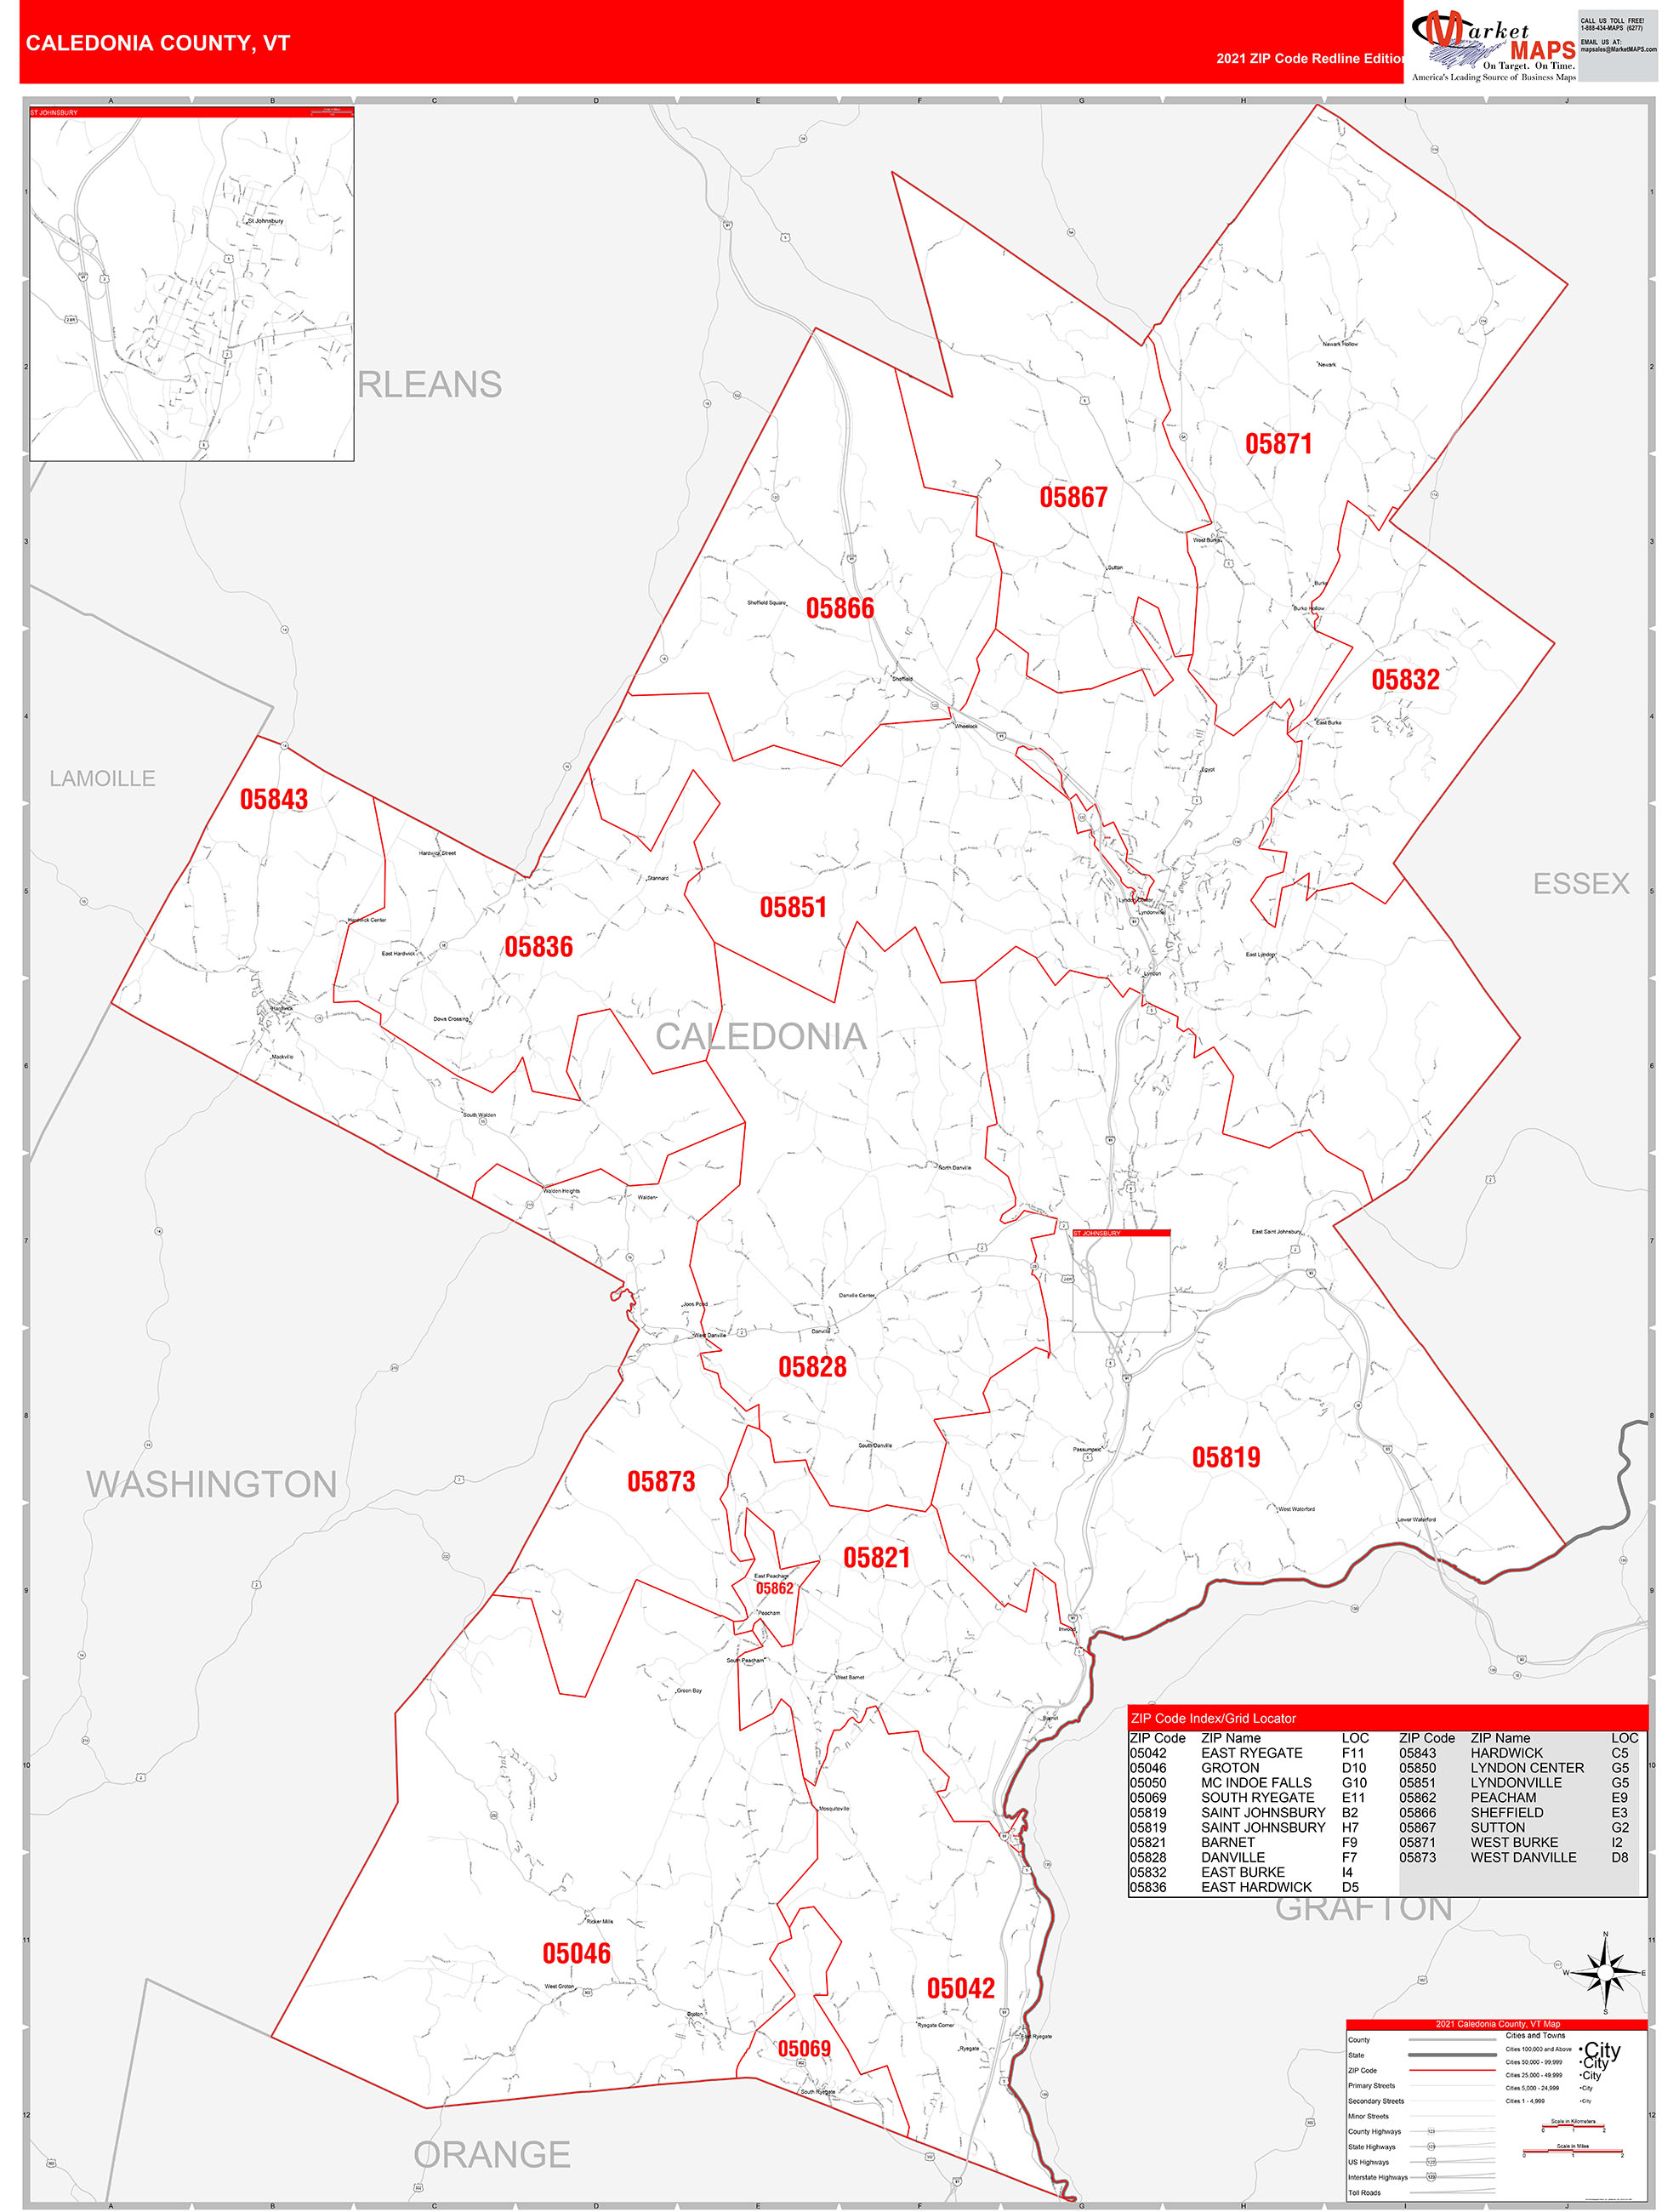 Caledonia County, VT Zip Code Wall Map Red Line Style by MarketMAPS ...